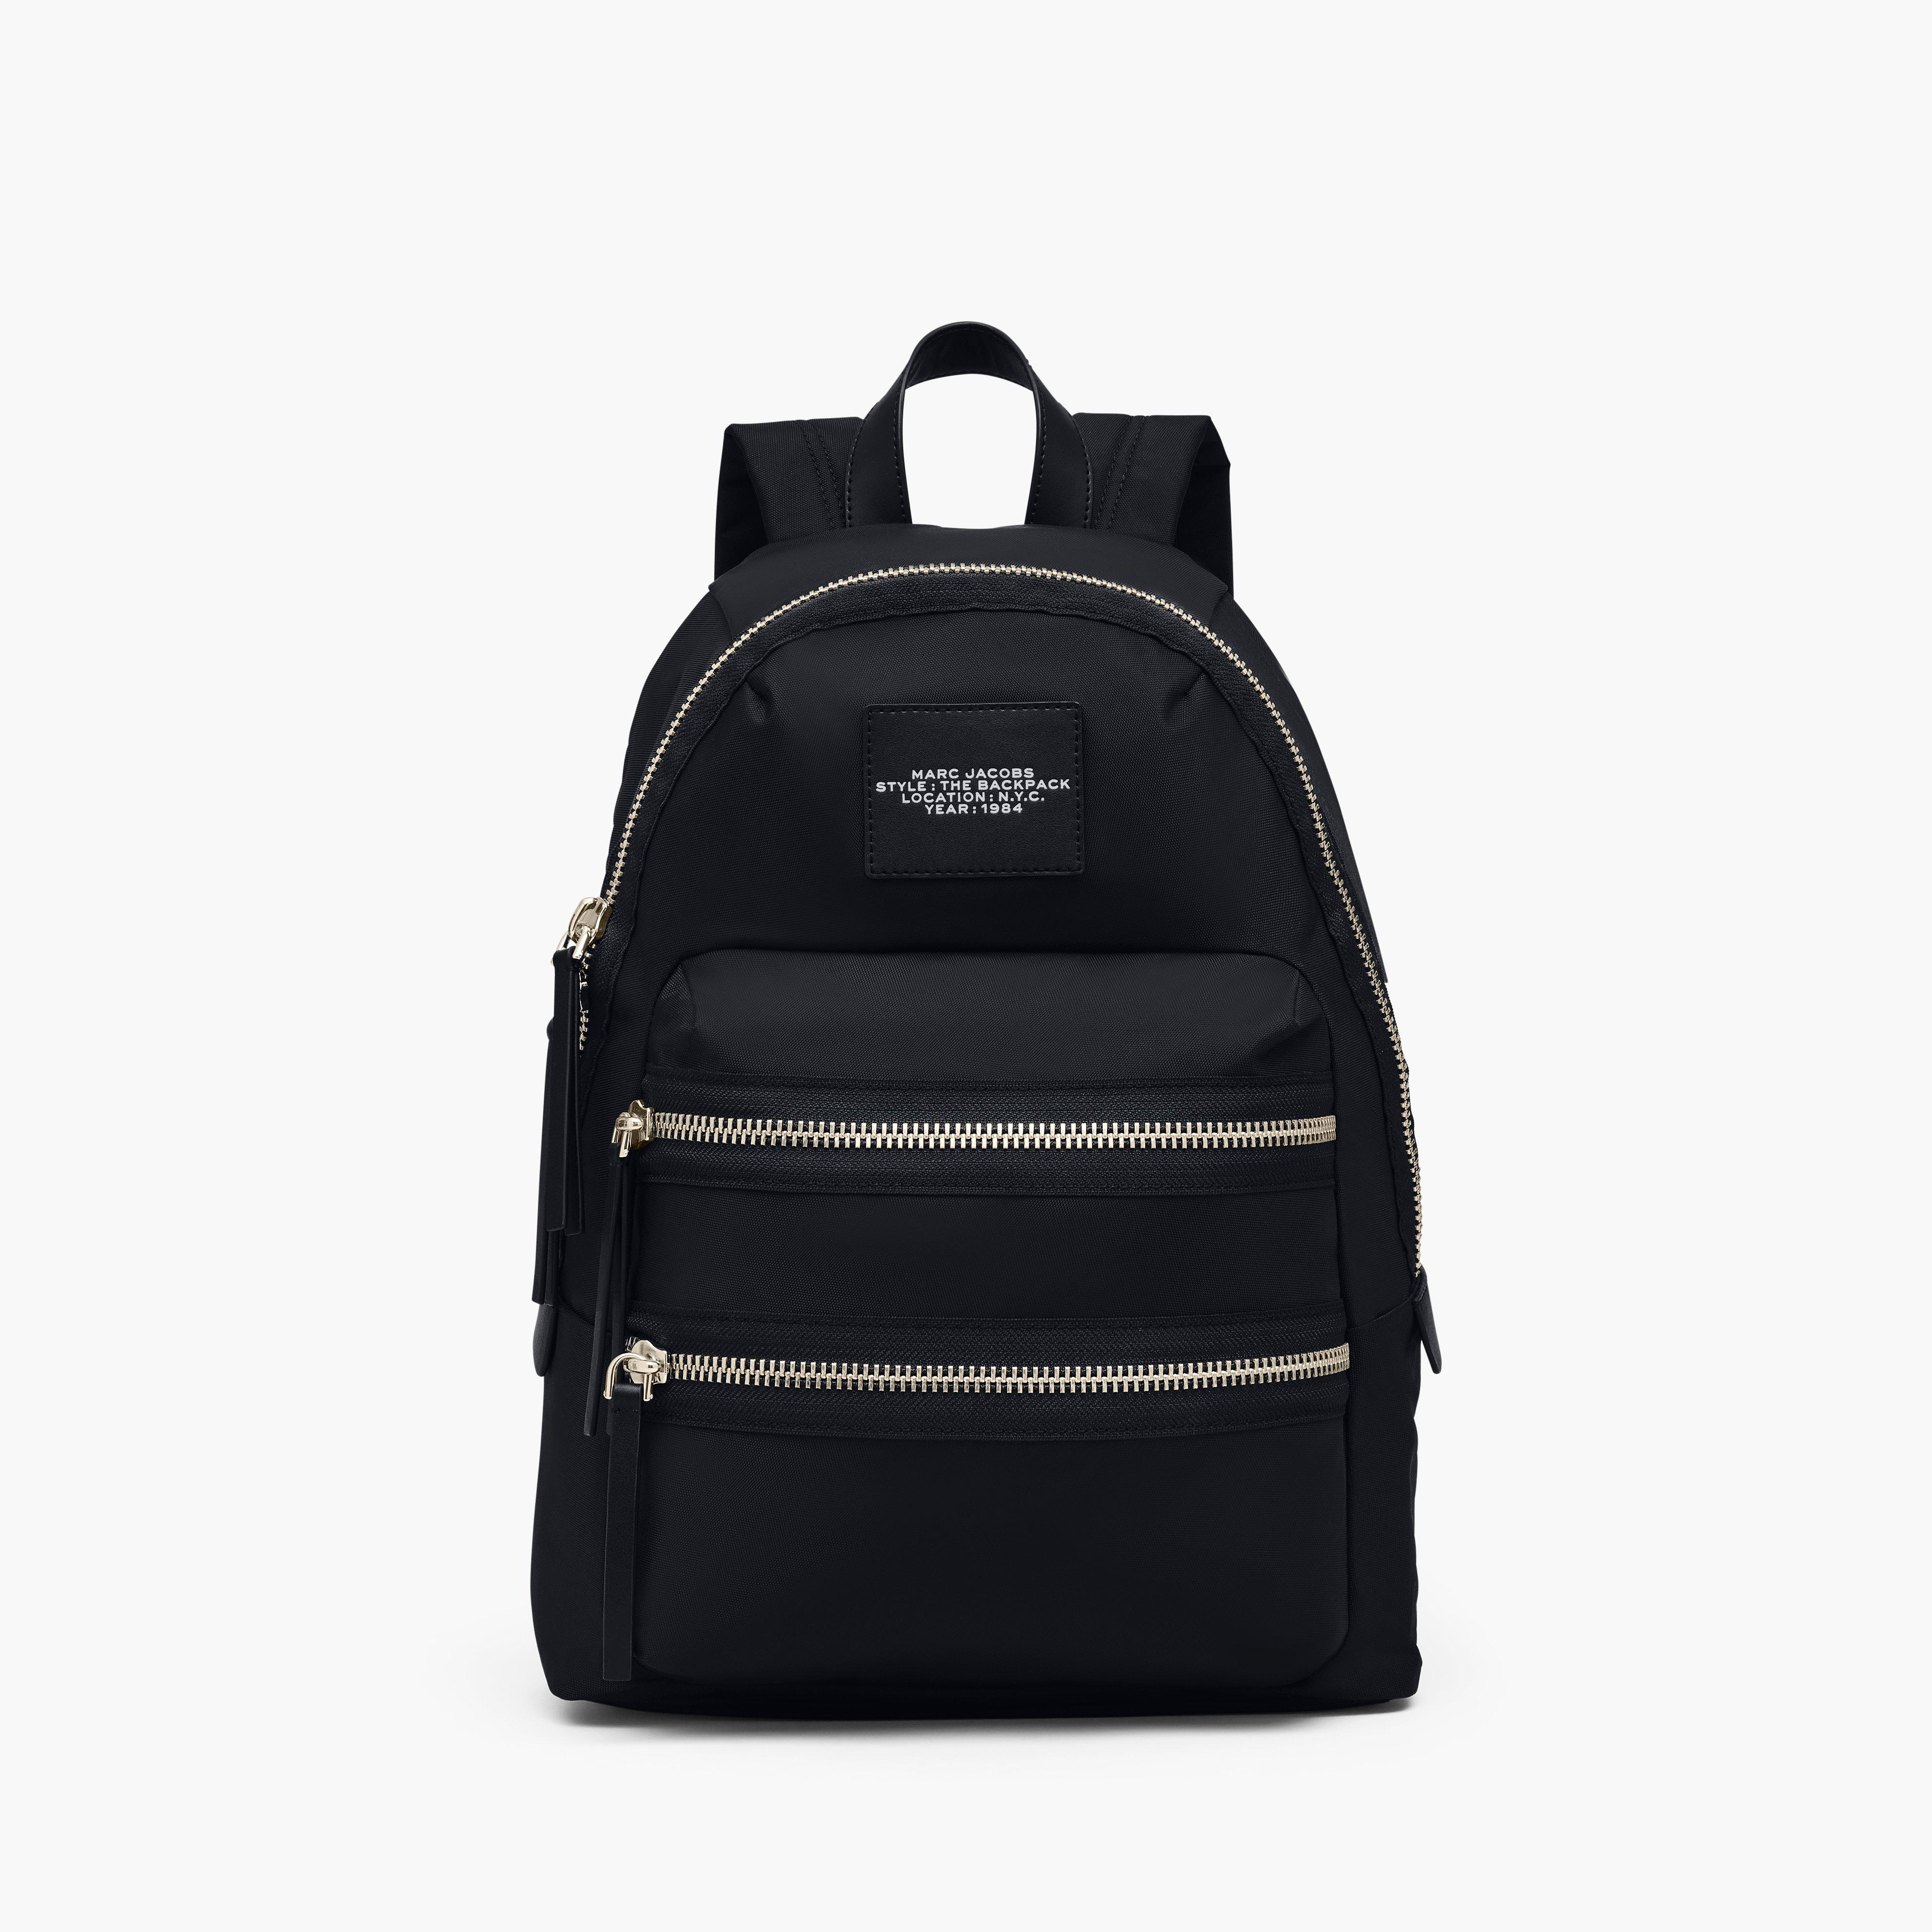 Marc by Marc jacobs The Biker Nylon Large Backpack,BLACK